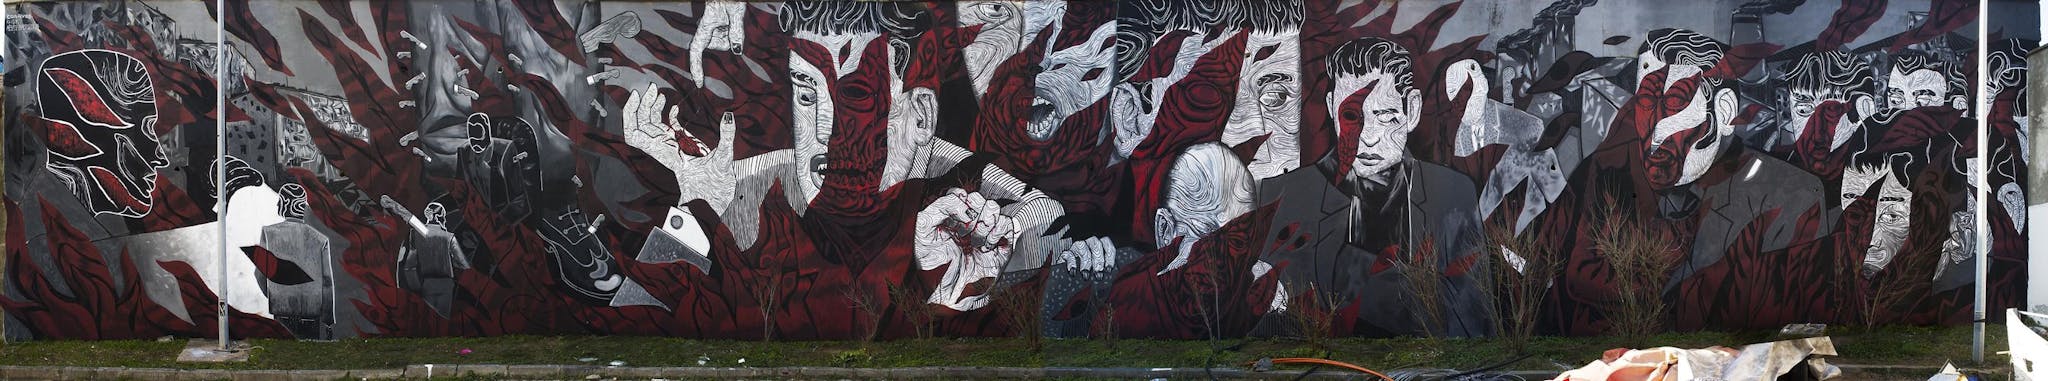  by ares in Istanbul